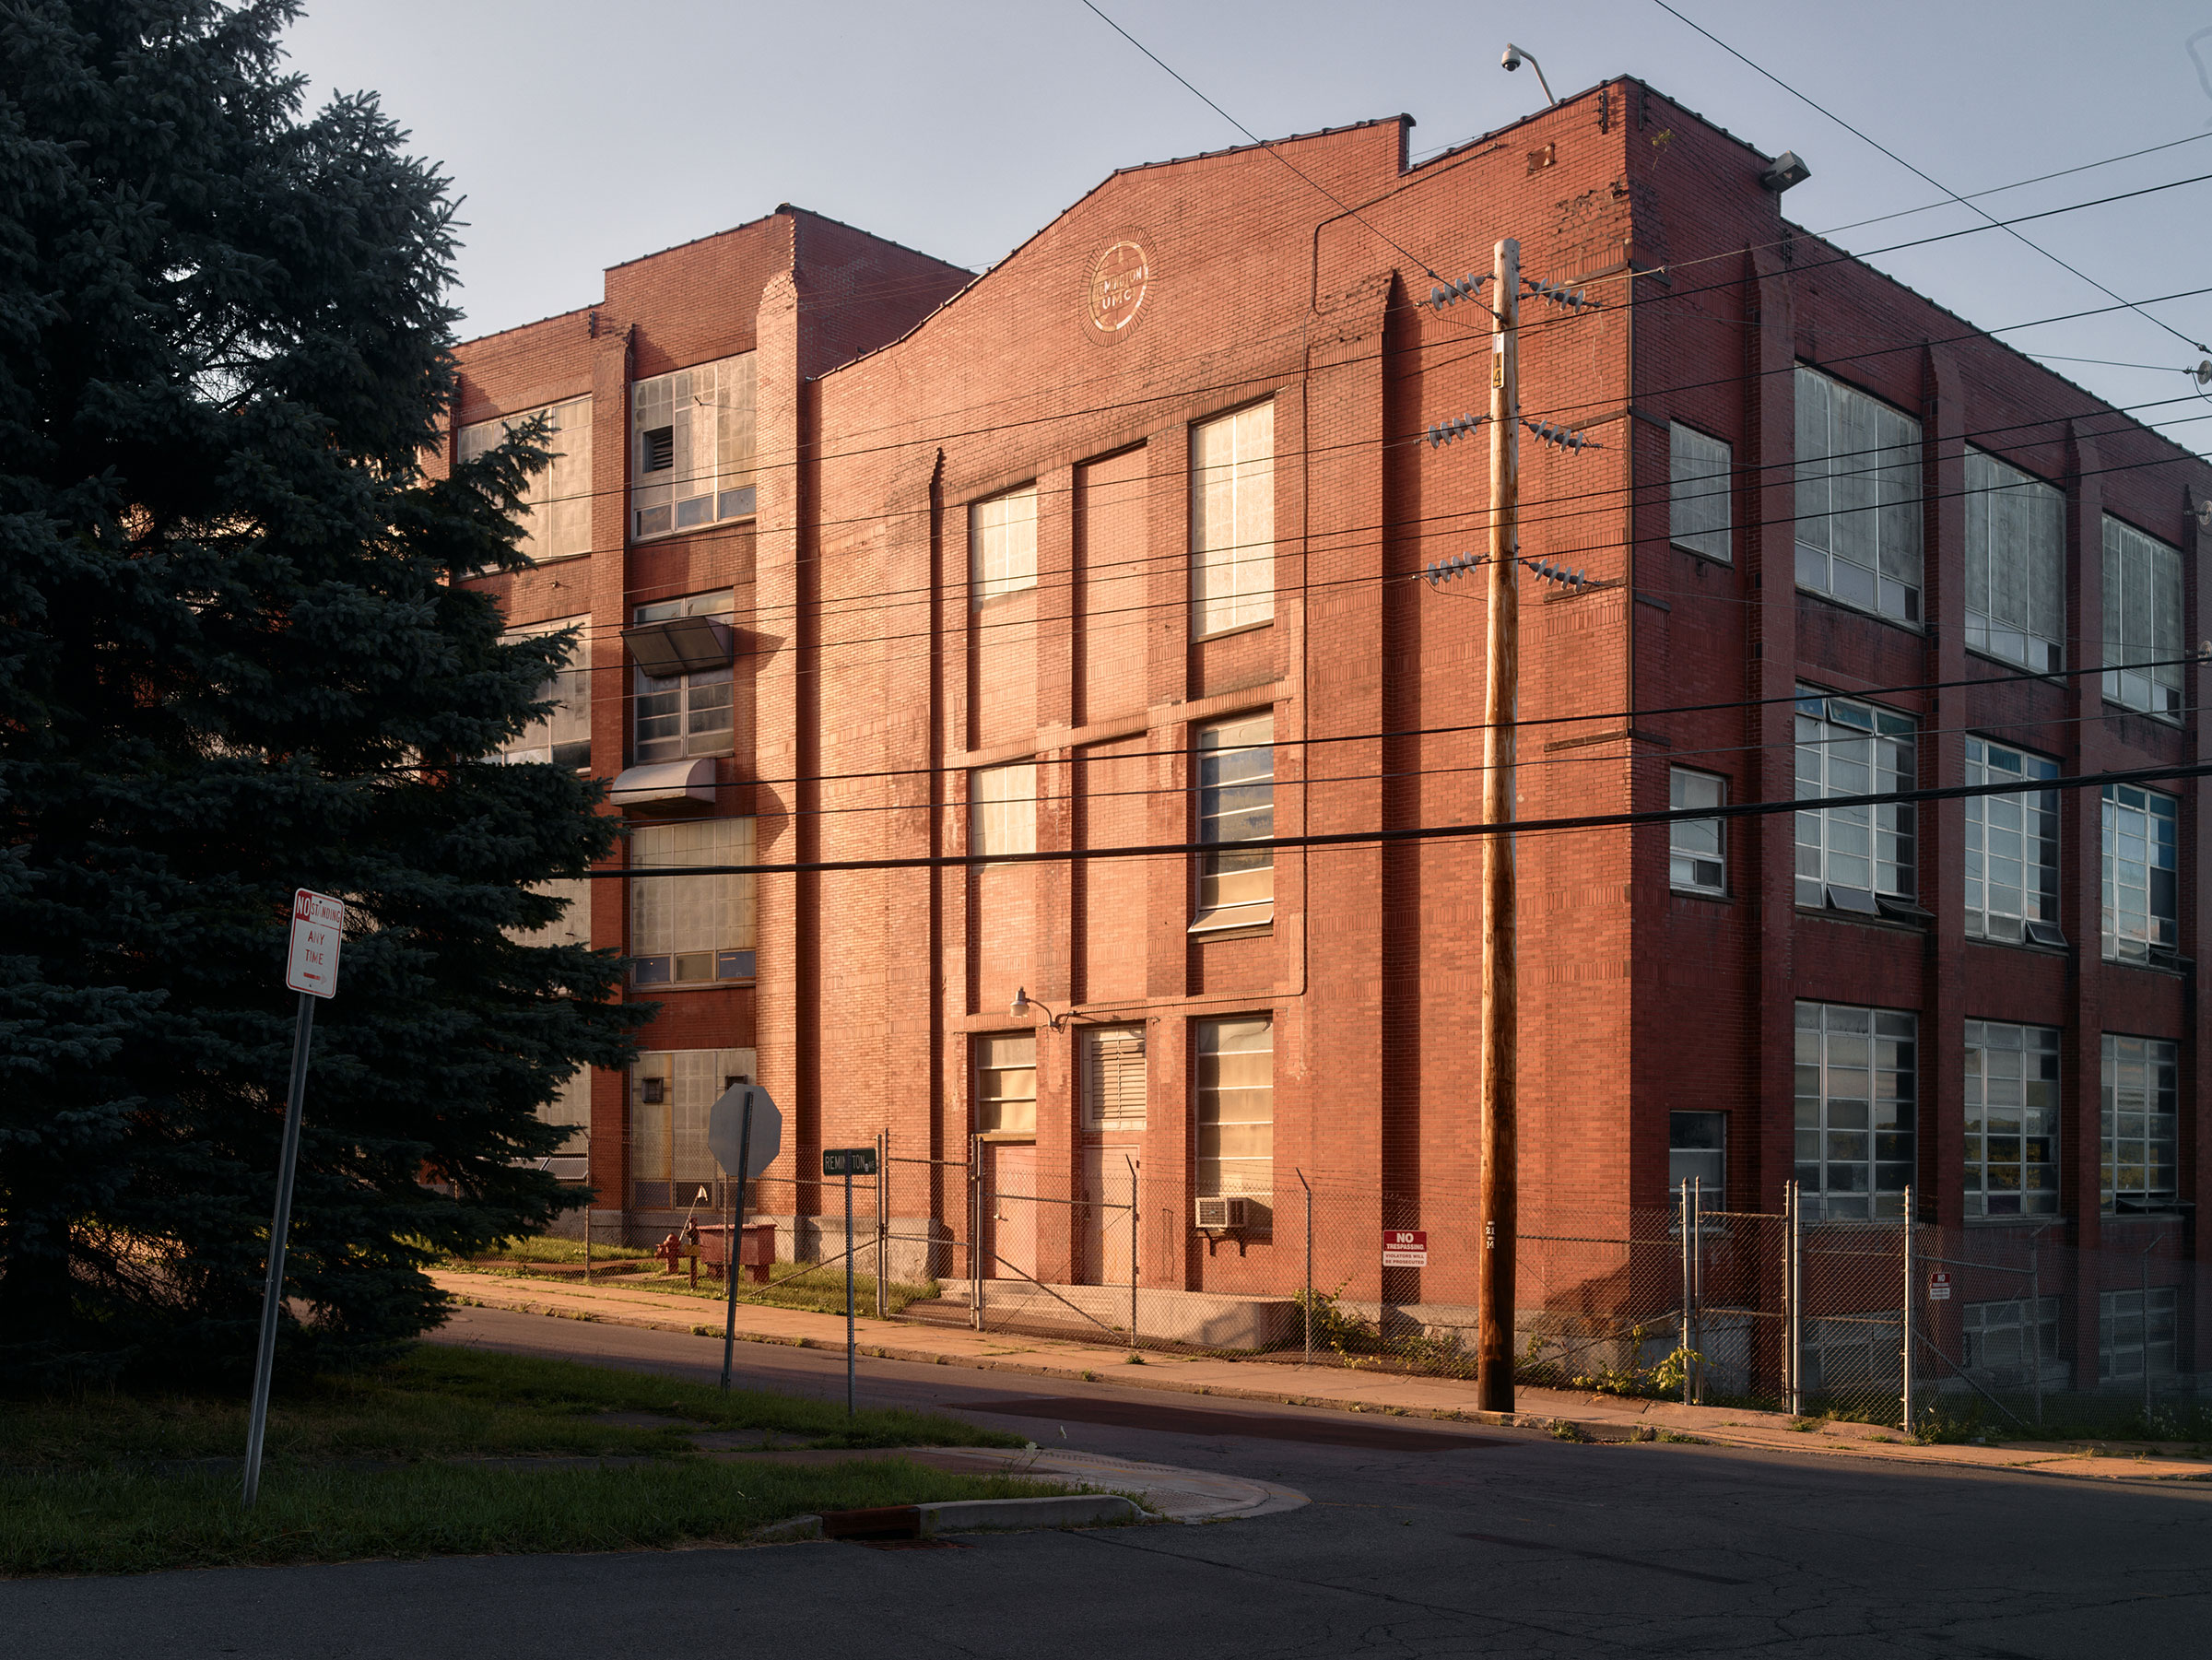 Remington Arms has told New York stakeholders that it now has no plans to close the Ilion facility. (Jason Koxvold for TIME)